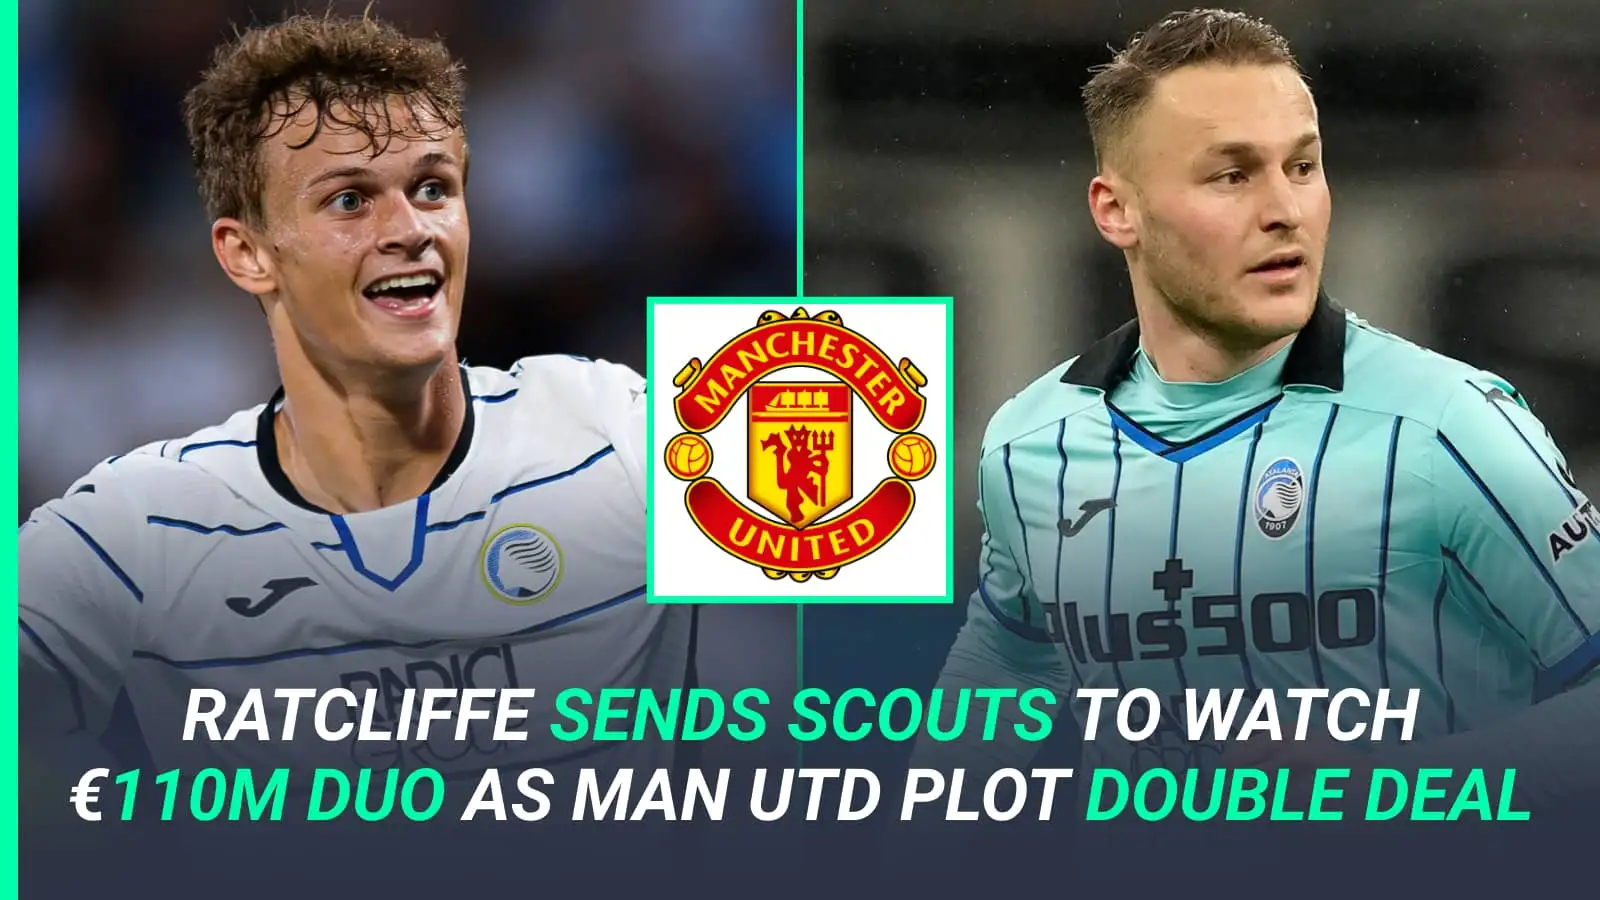 Man Utd scout £94m duo looking to take down Liverpool with Ratcliffe ready to show costly pair the door